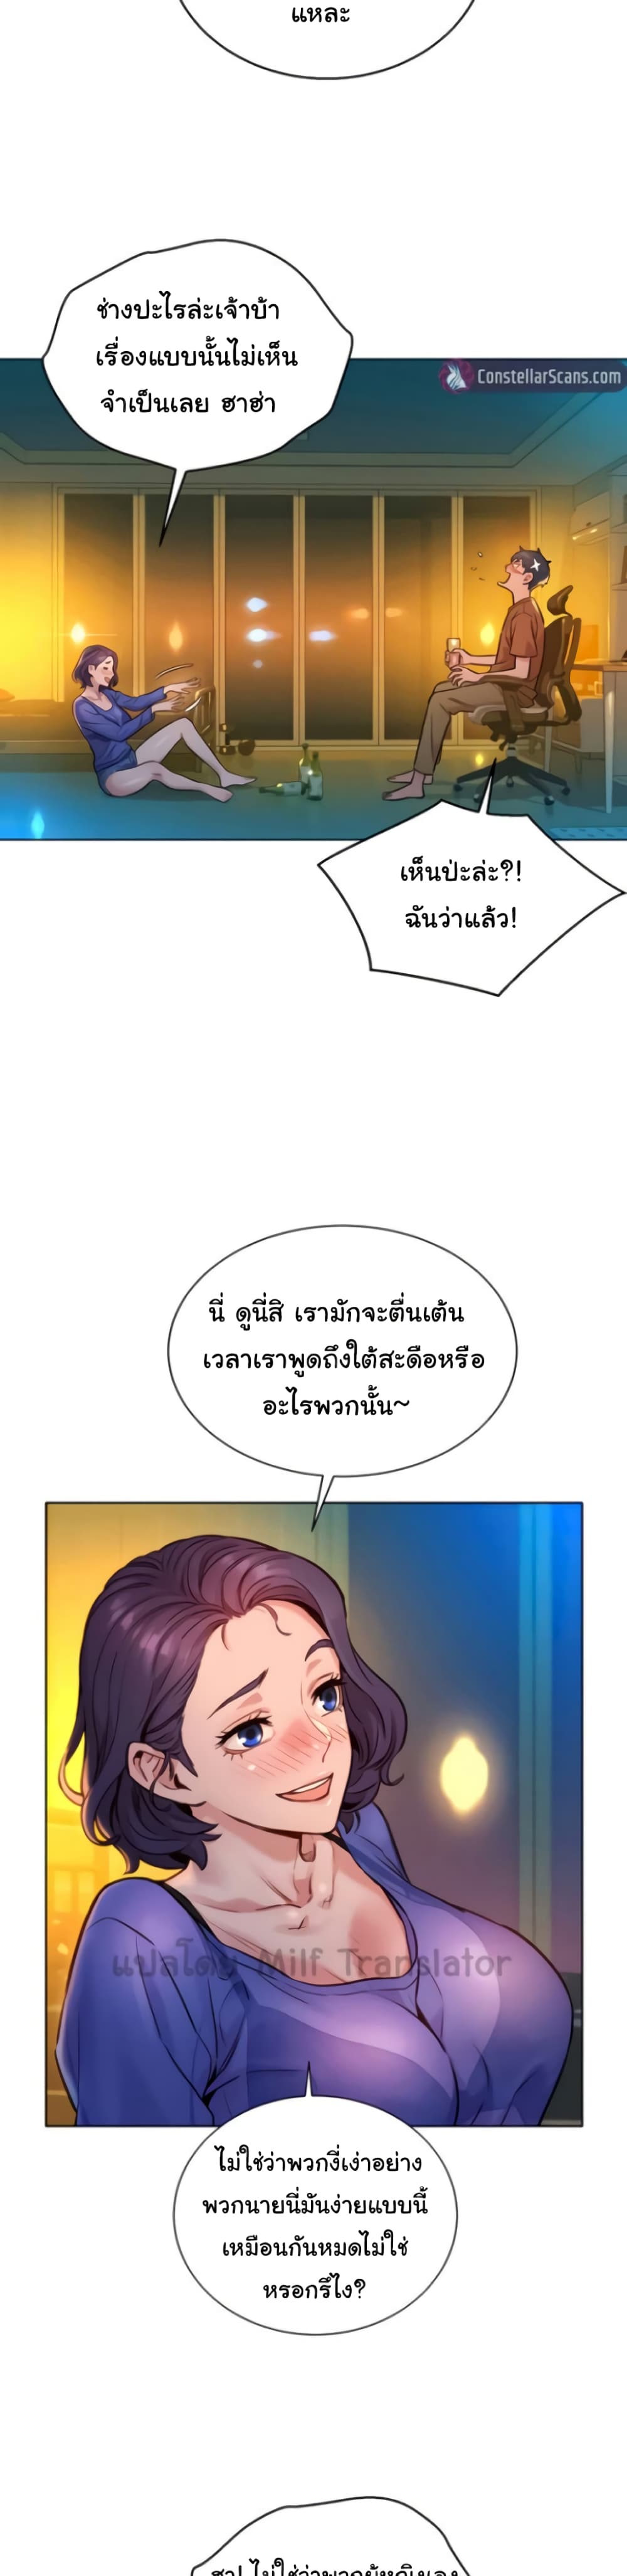 Let’s Hang Out from Today ตอนที่ 1 ภาพ 40